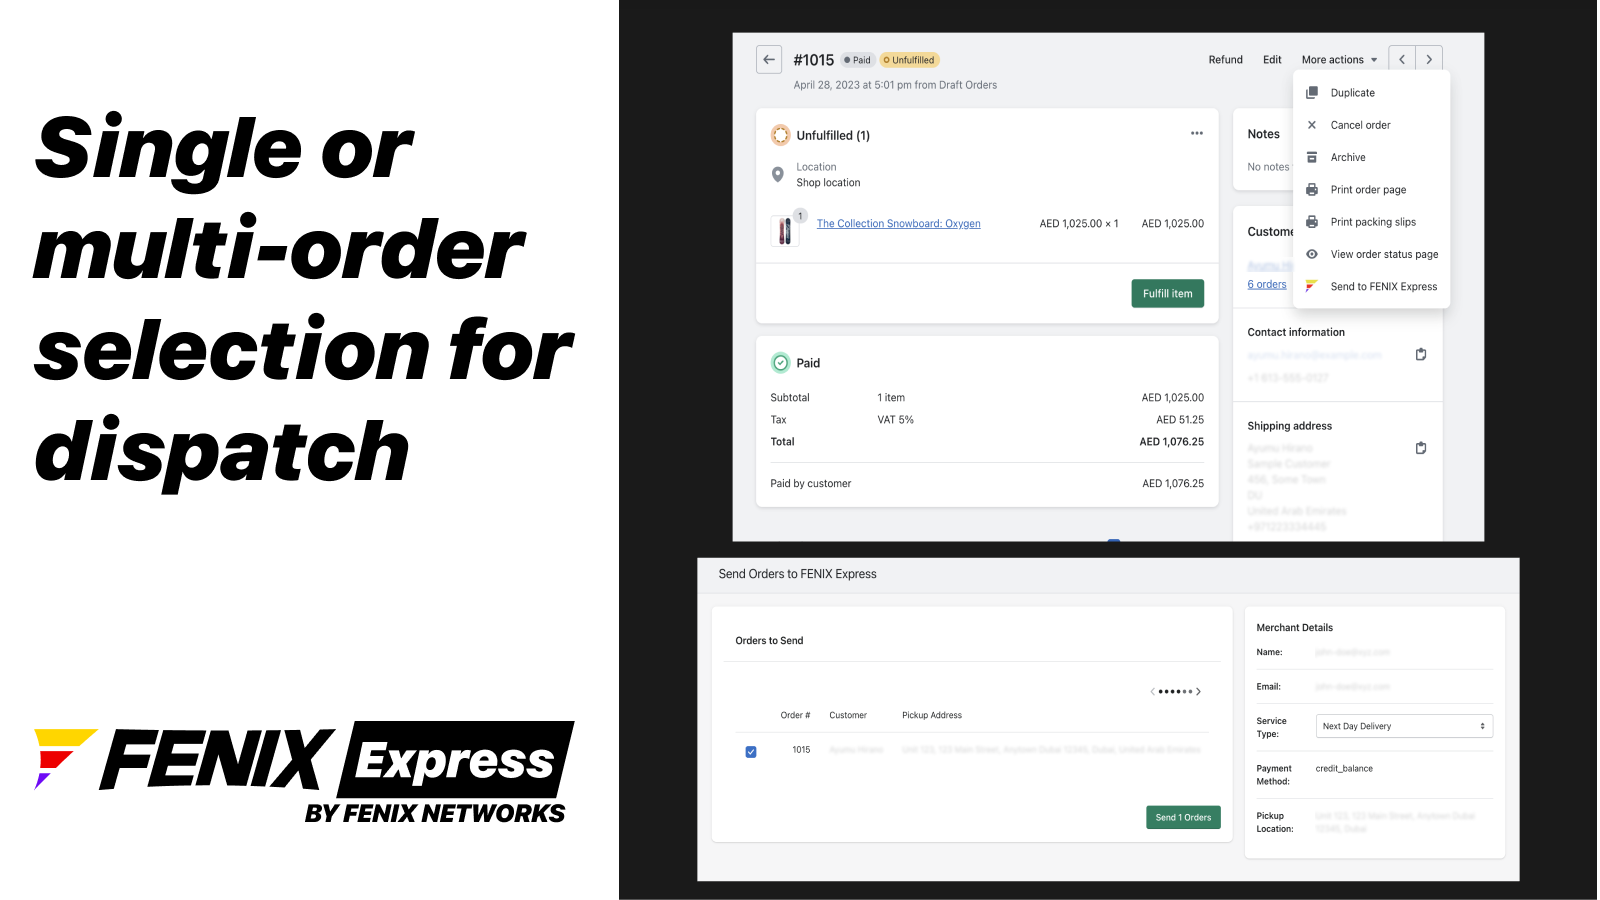 Send order(s) to FENIX Express for fulfillment